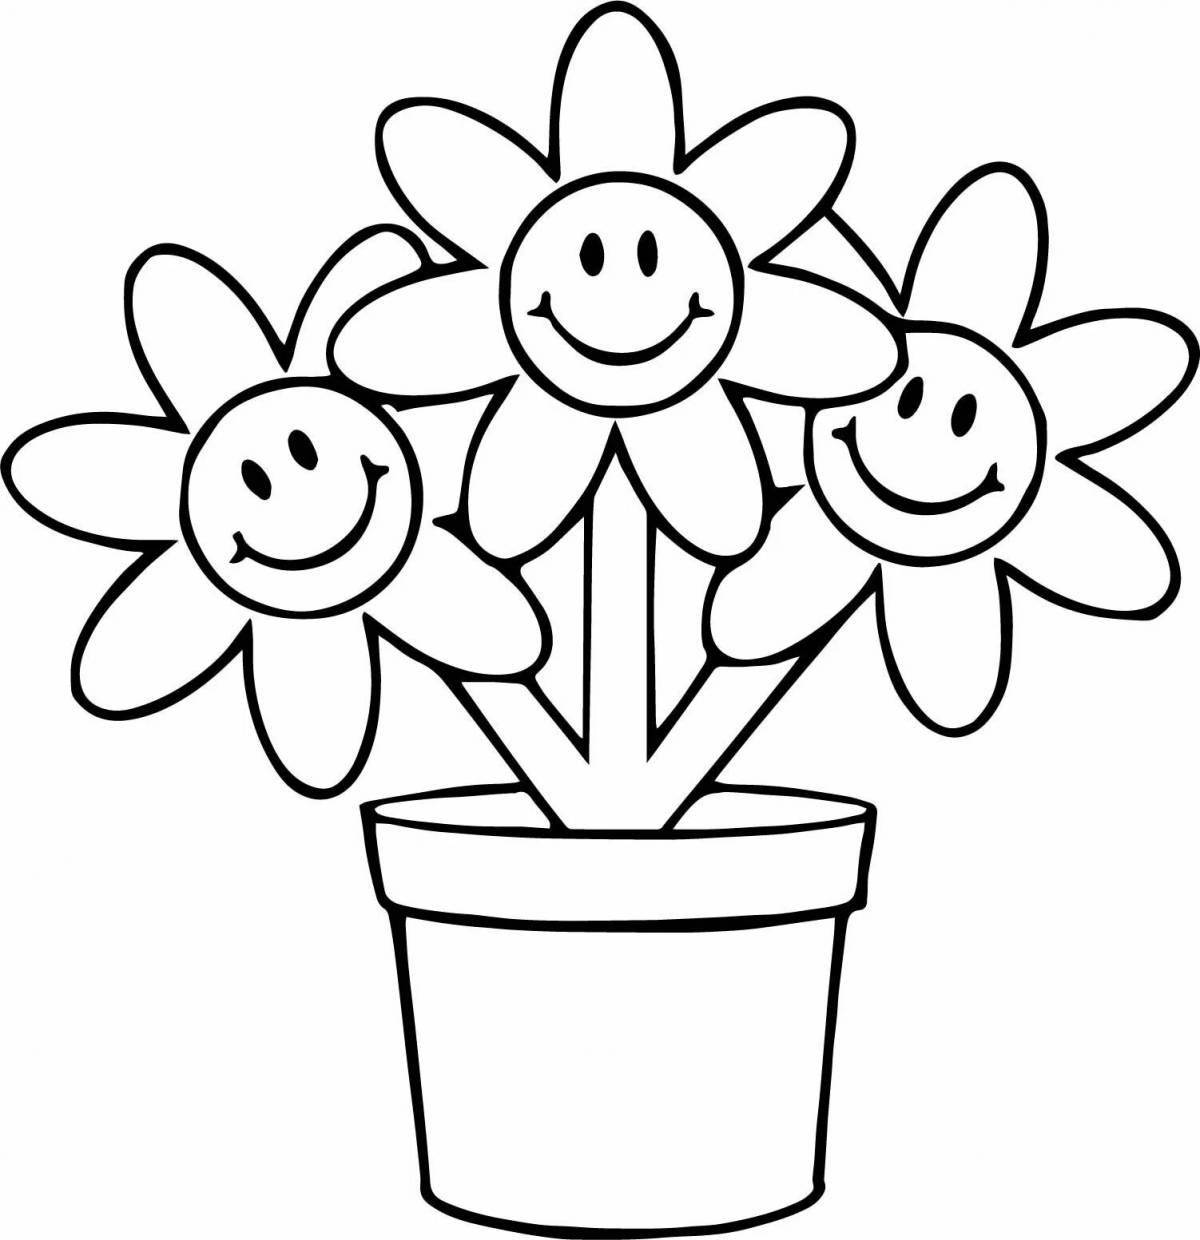 Playtime flower pot coloring book for kids